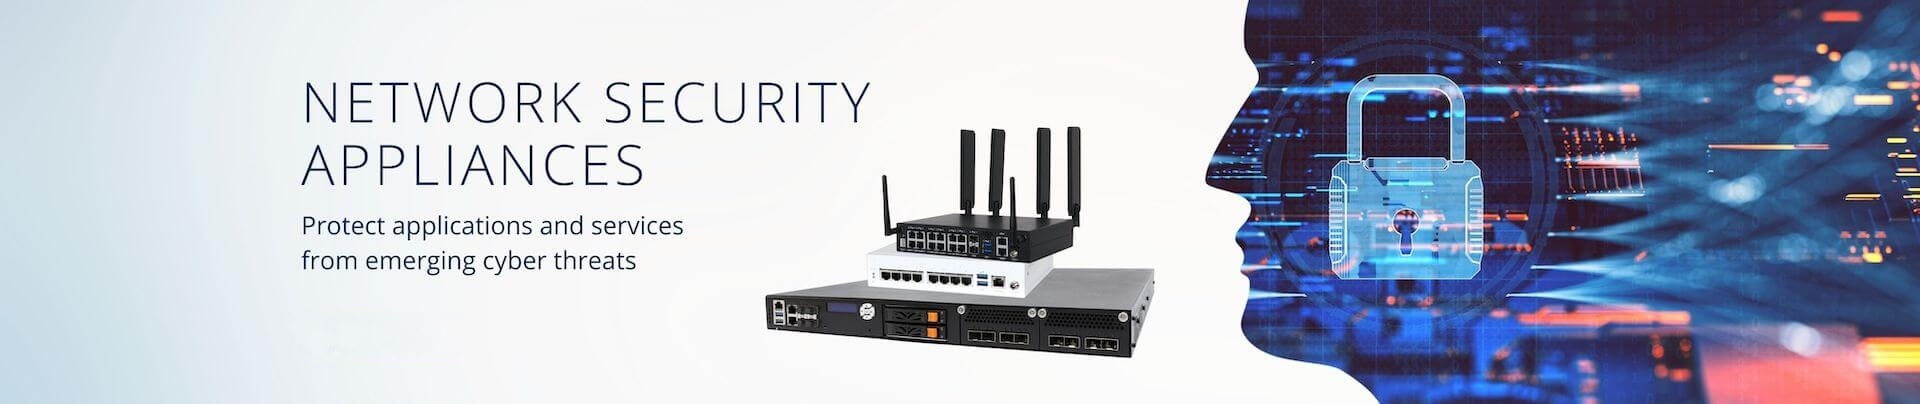 network-security-banner